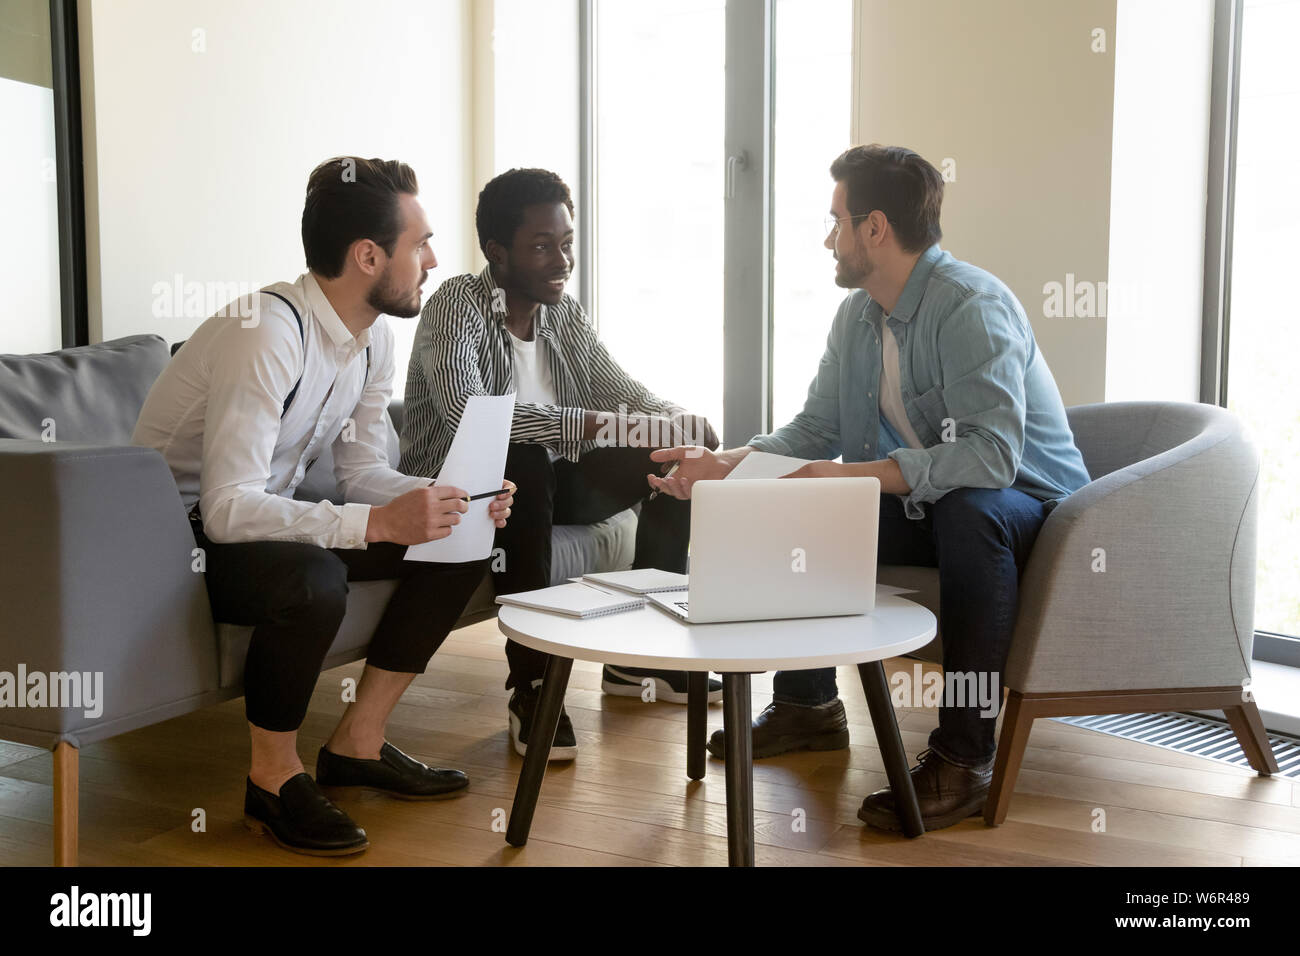 Diverse male workers team listen to manager mentor discussing paperwork Stock Photo